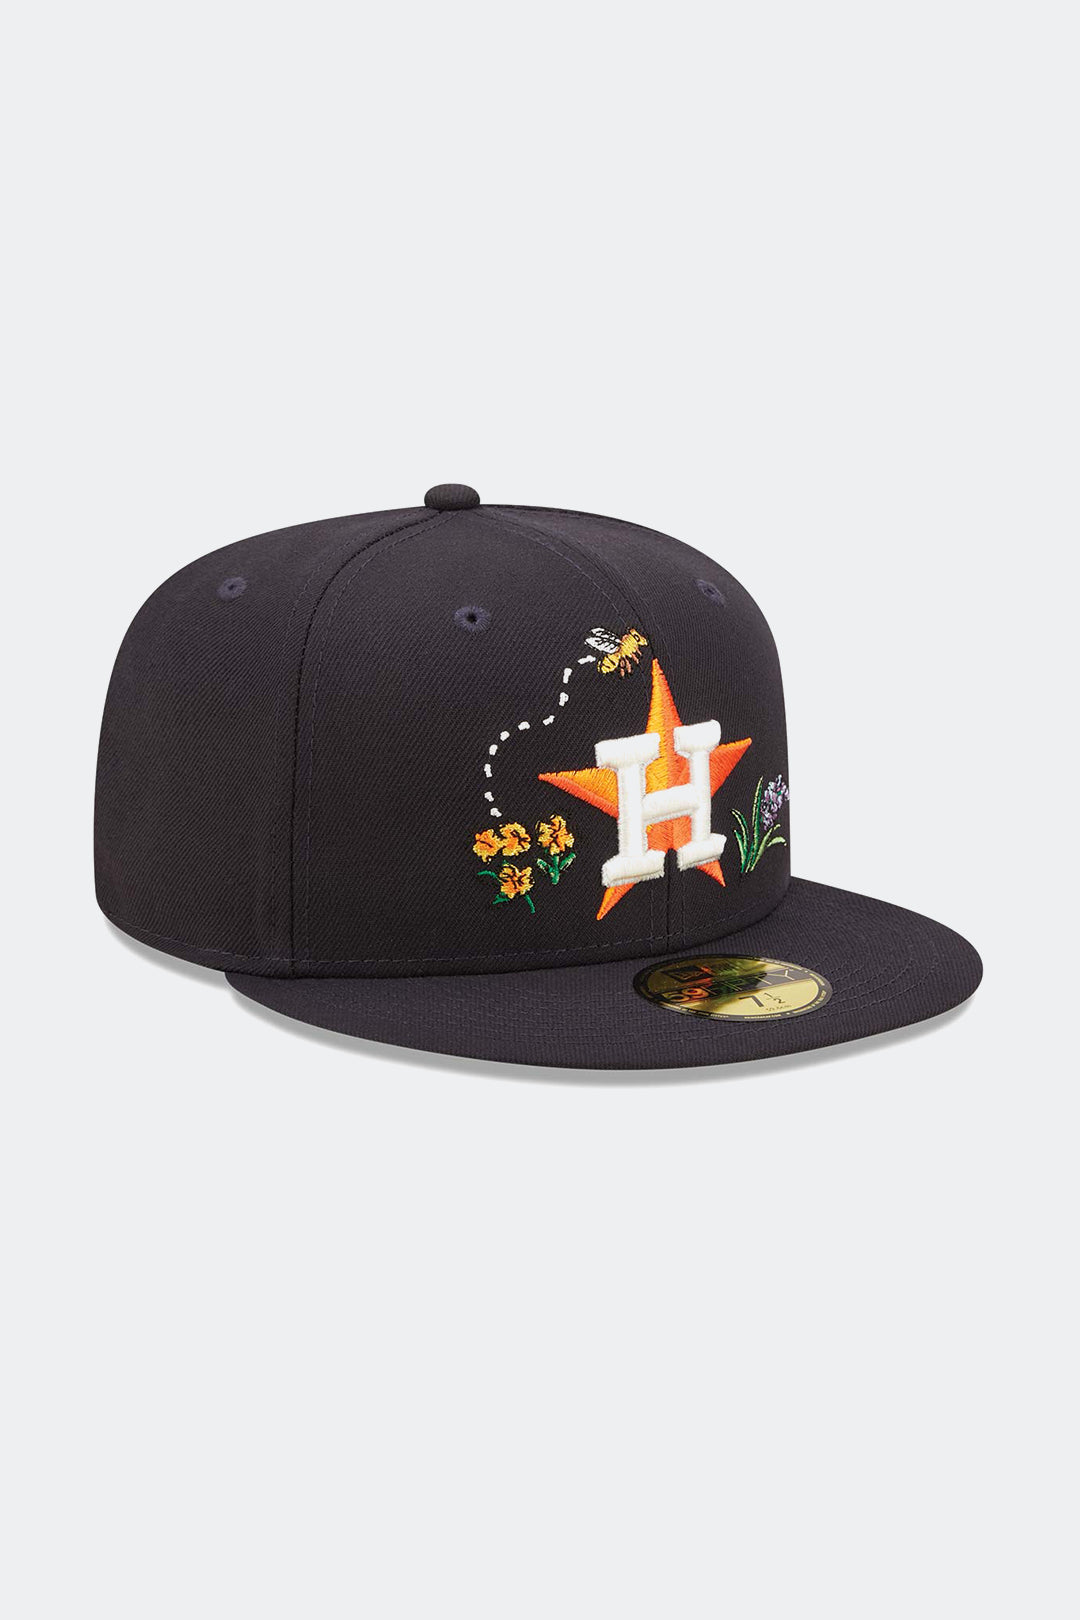 NEW ERA 59FIFTY ASTROS "WATERCOLOR FLORAL" - HYPE